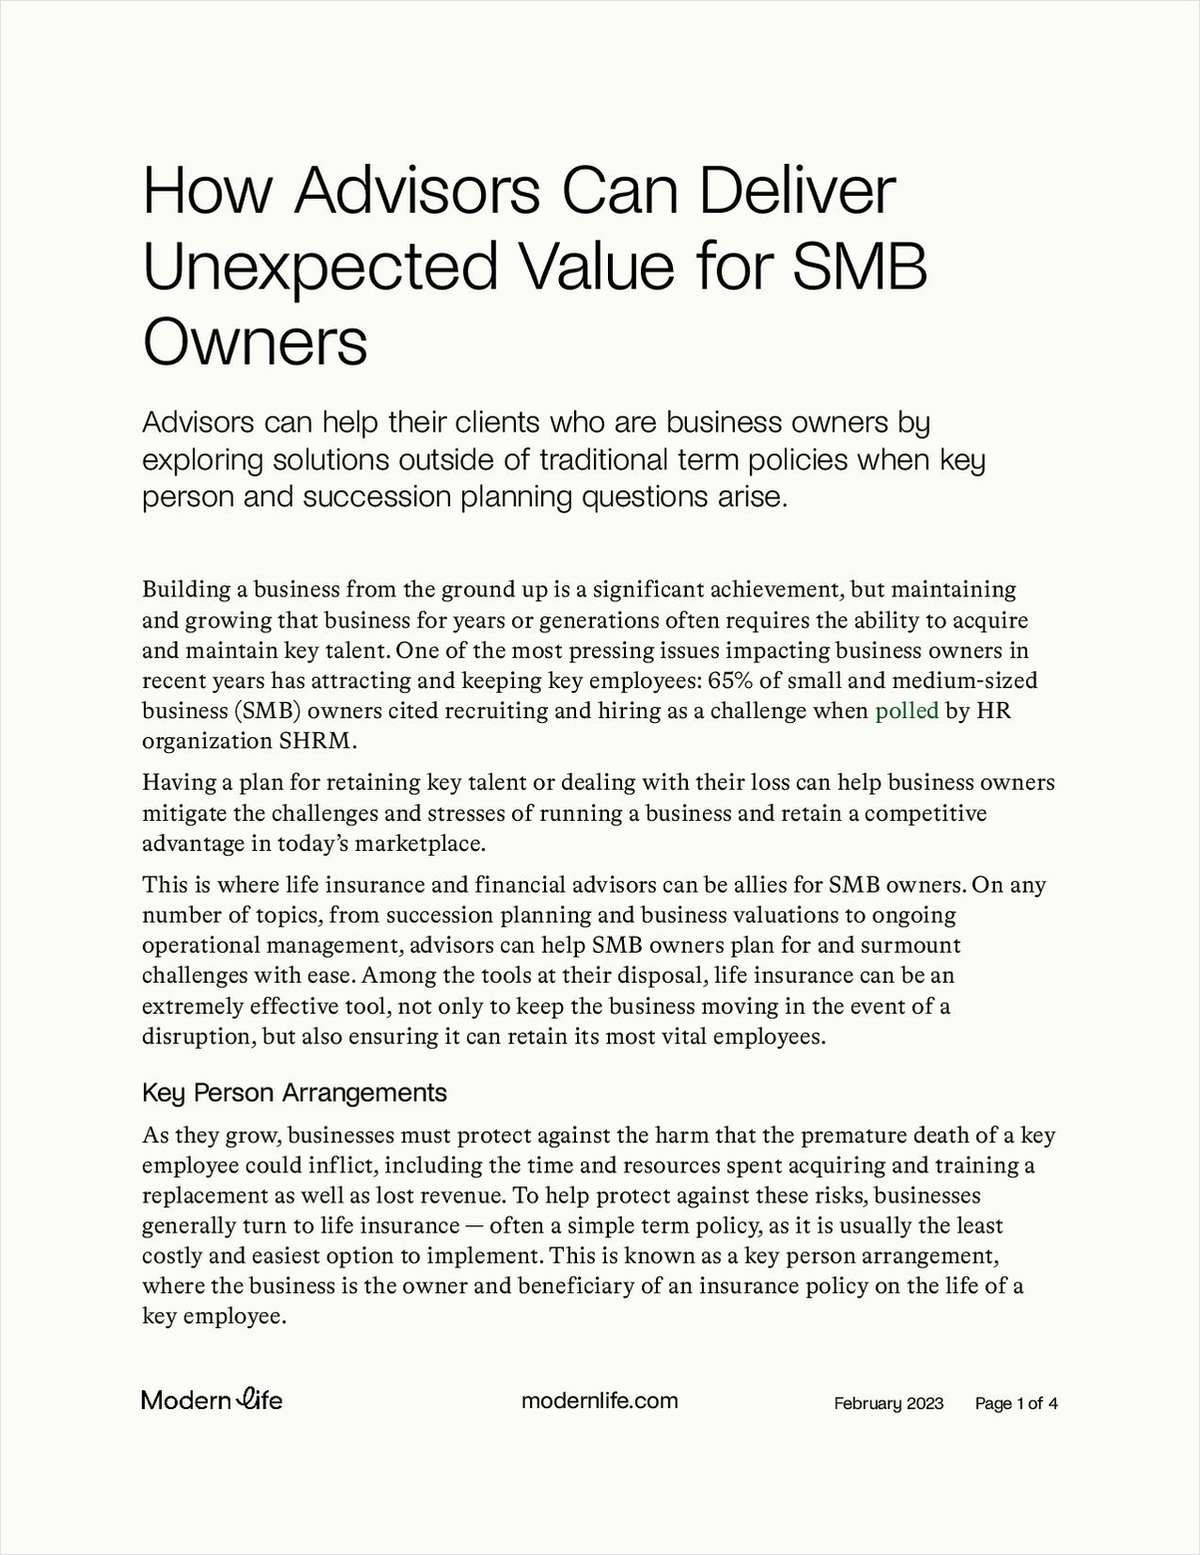 How Advisors Can Deliver Unexpected Value for SMB Owners